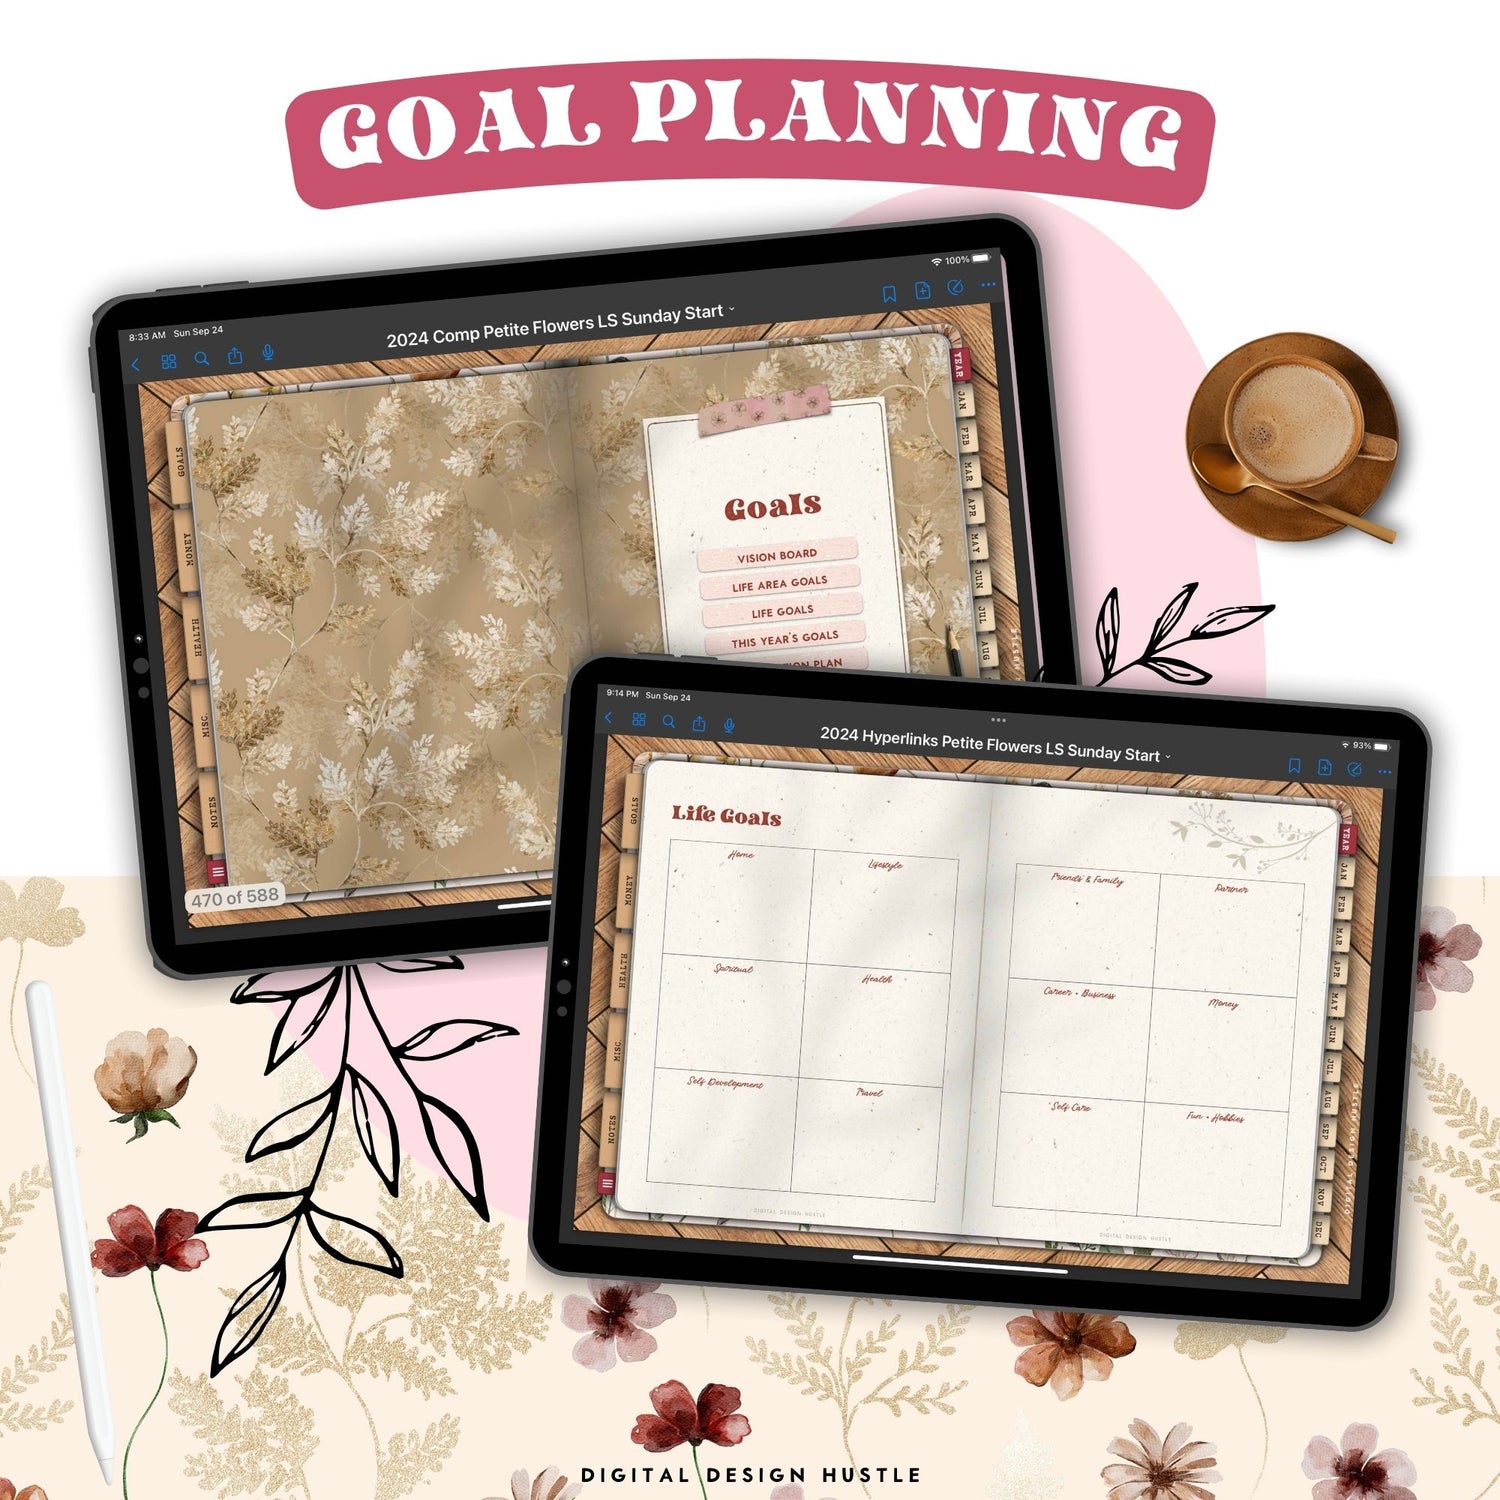 2024 Ultimate Life Planner